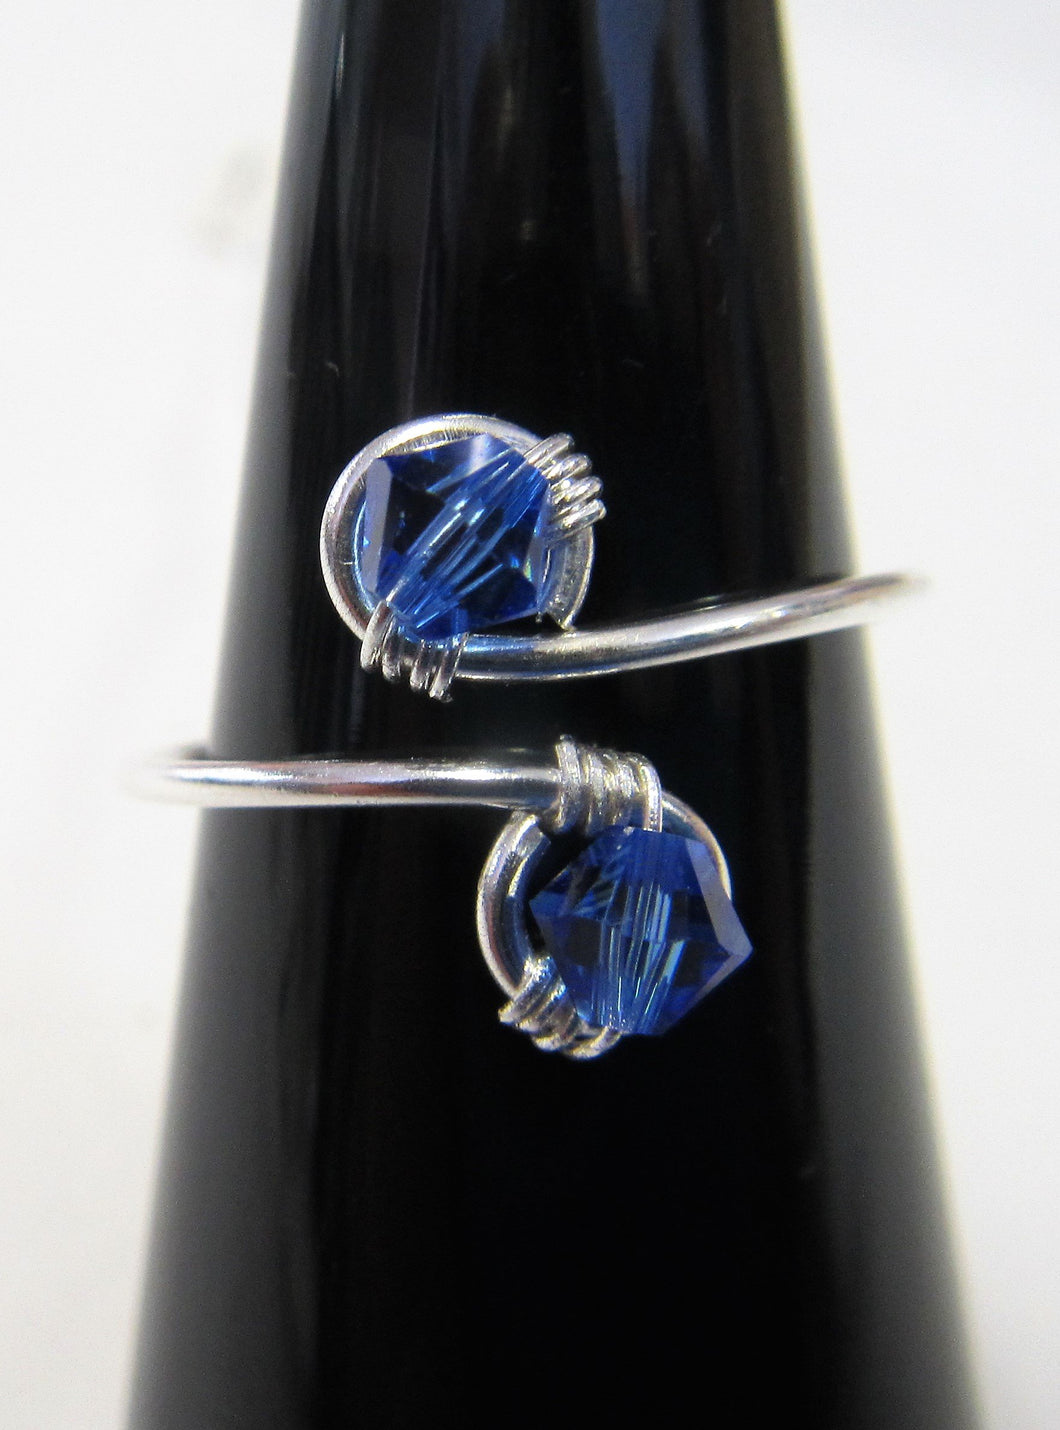 Handcrafted sterling silver wire ring with Blue swarovski crystals Size N+